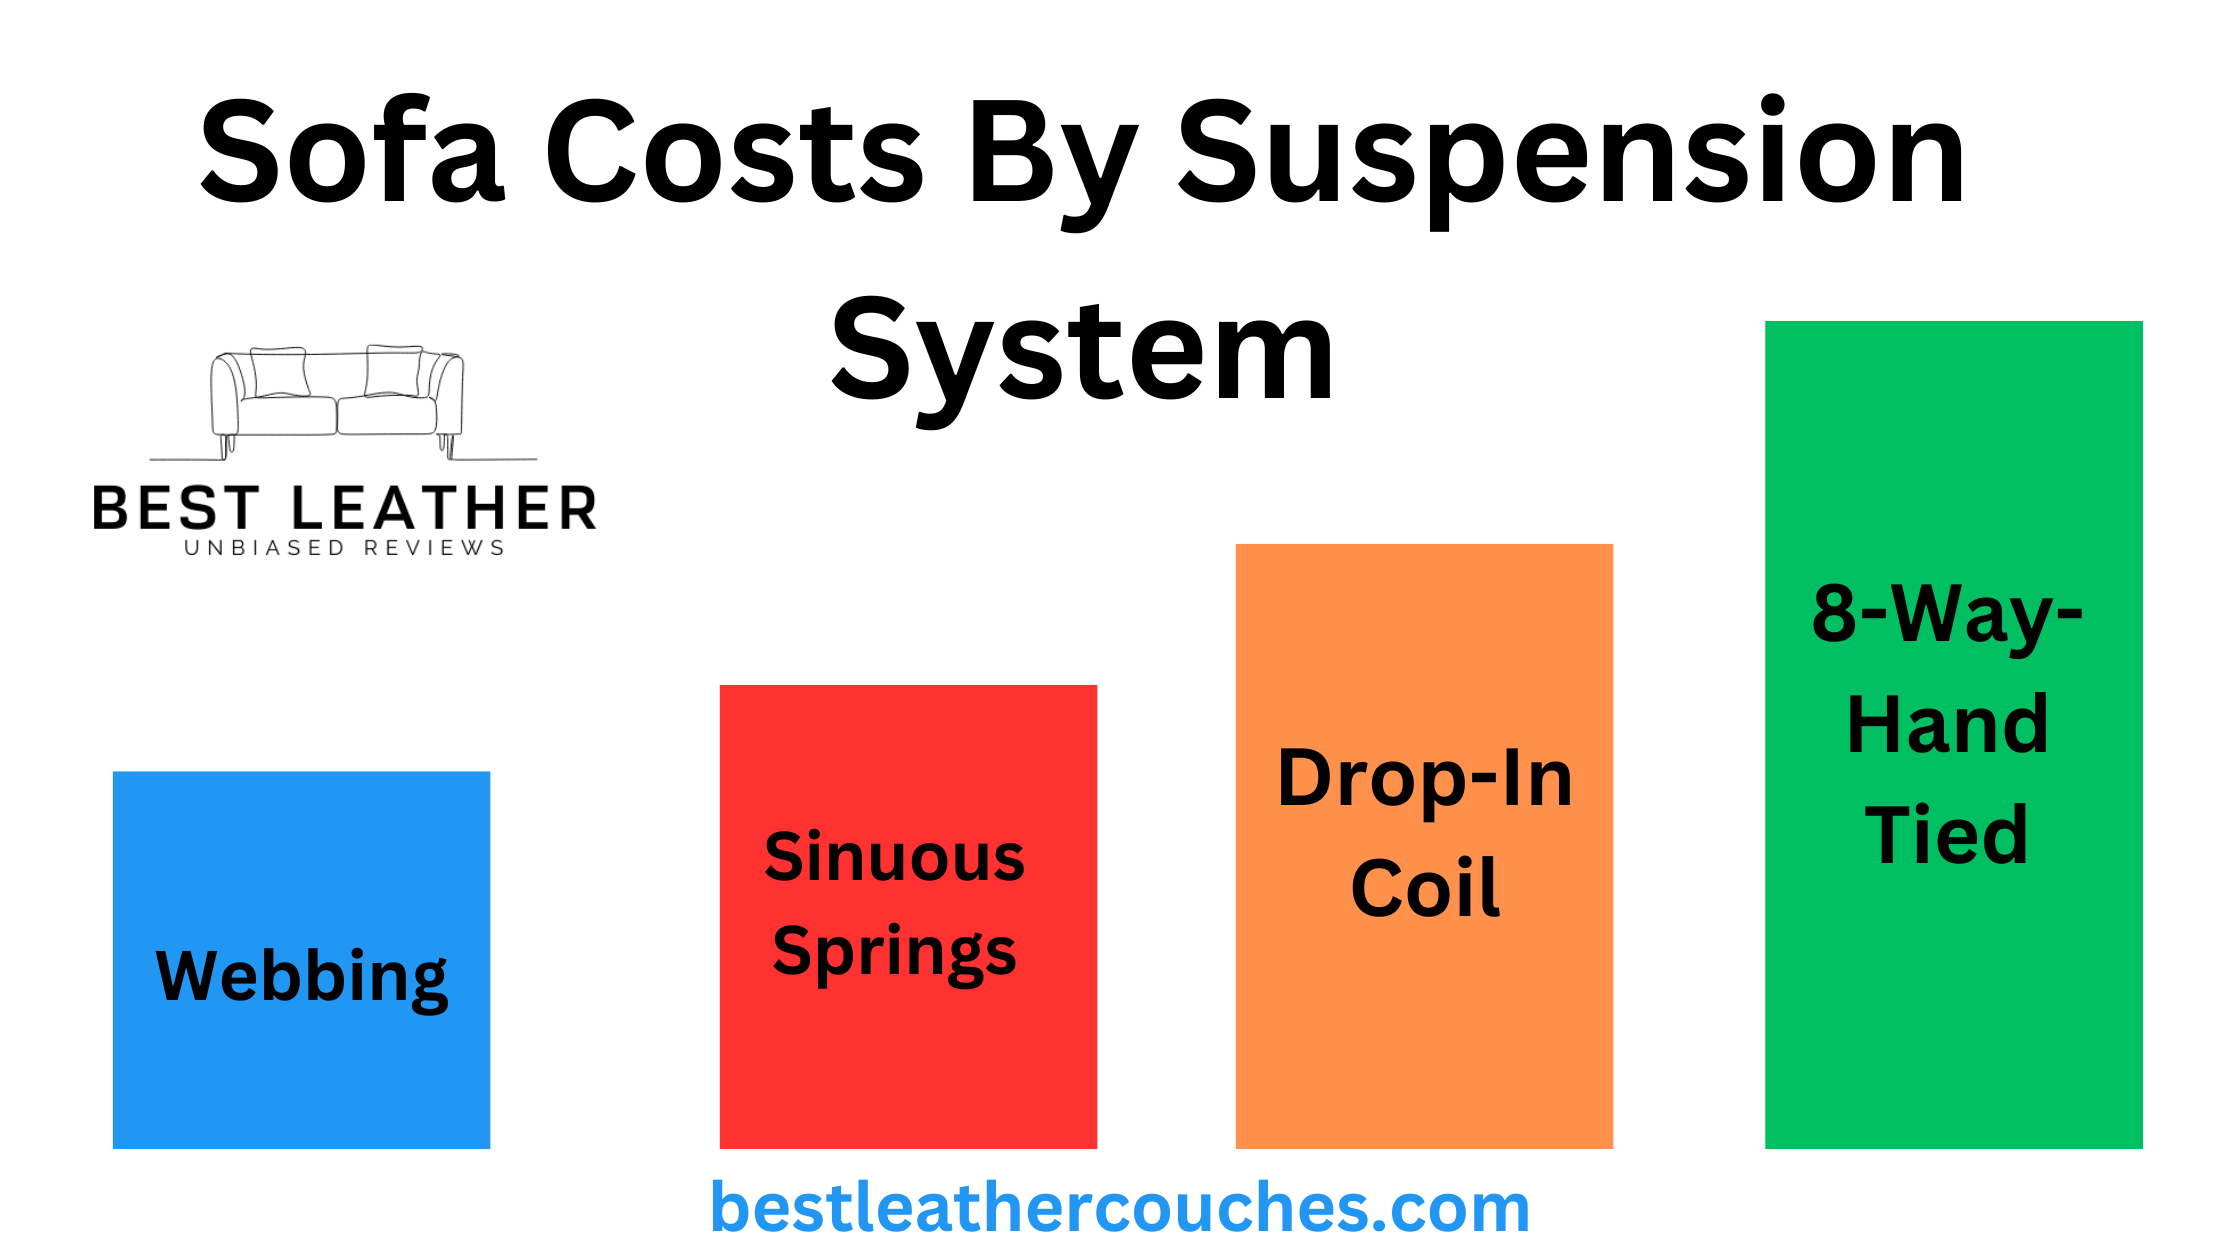 Sofa Costs By Suspension System